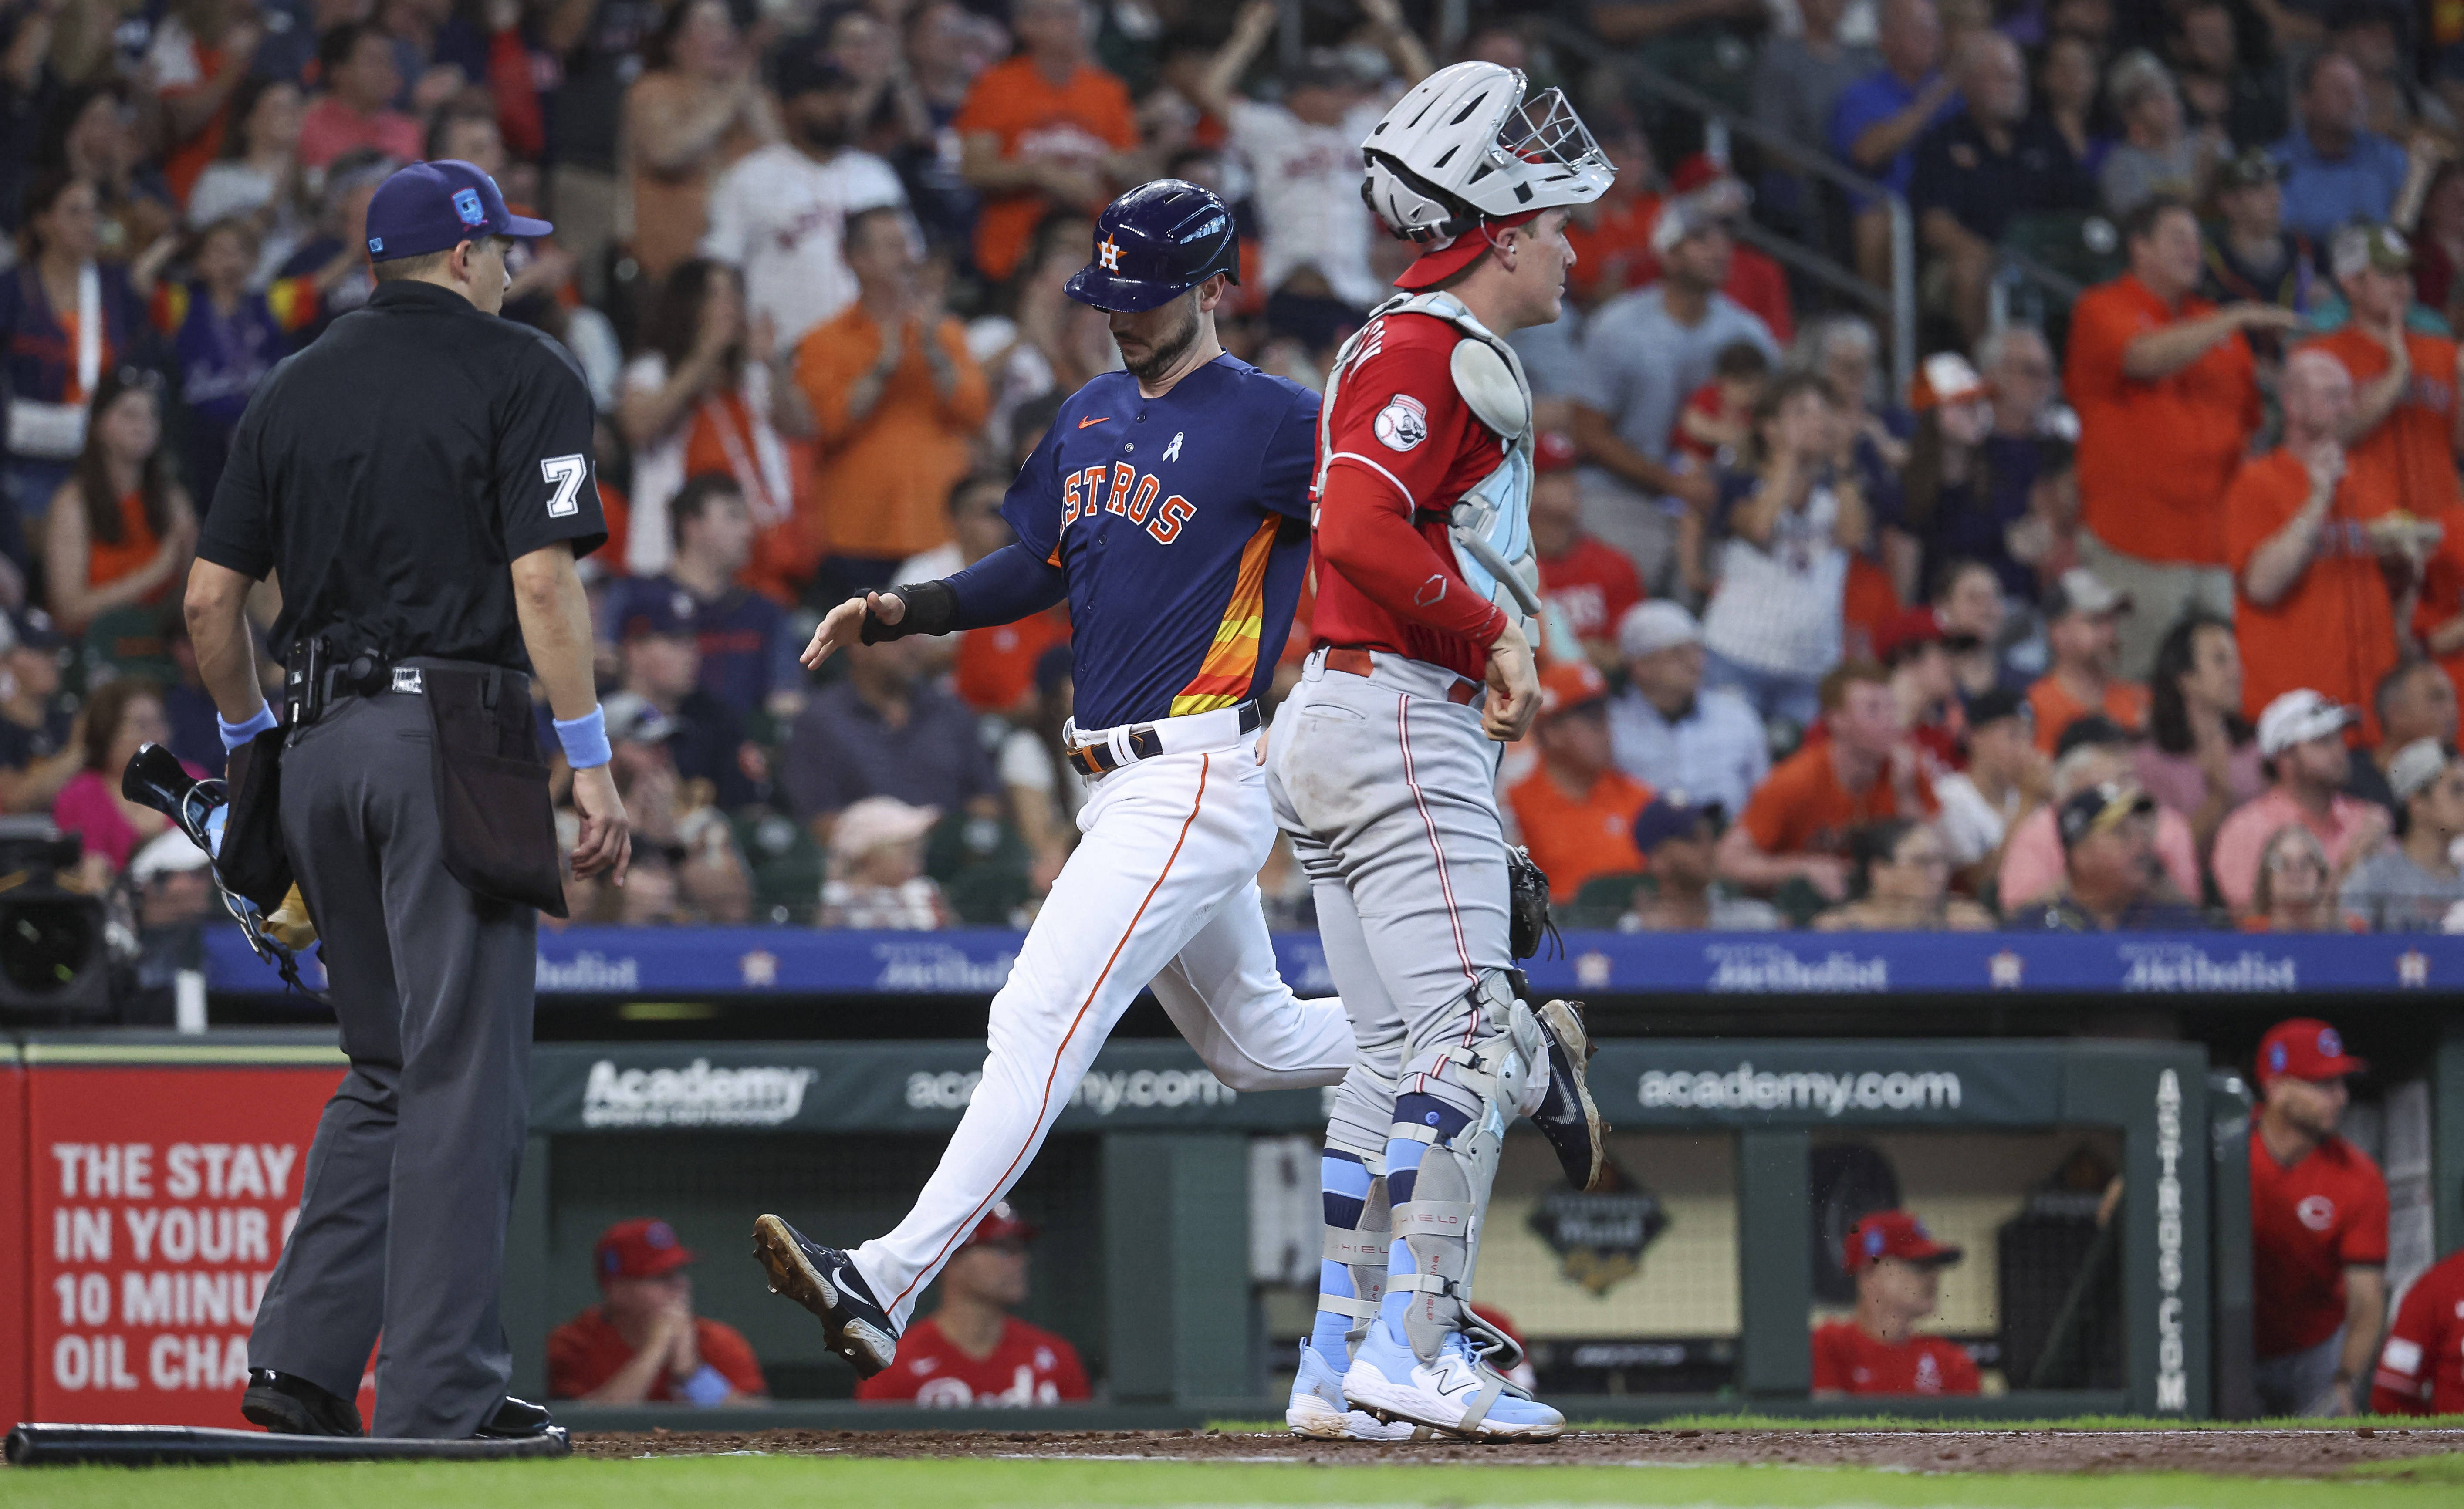 Reds score 3 in 10th to get 9-7 win over Astros, extend winning